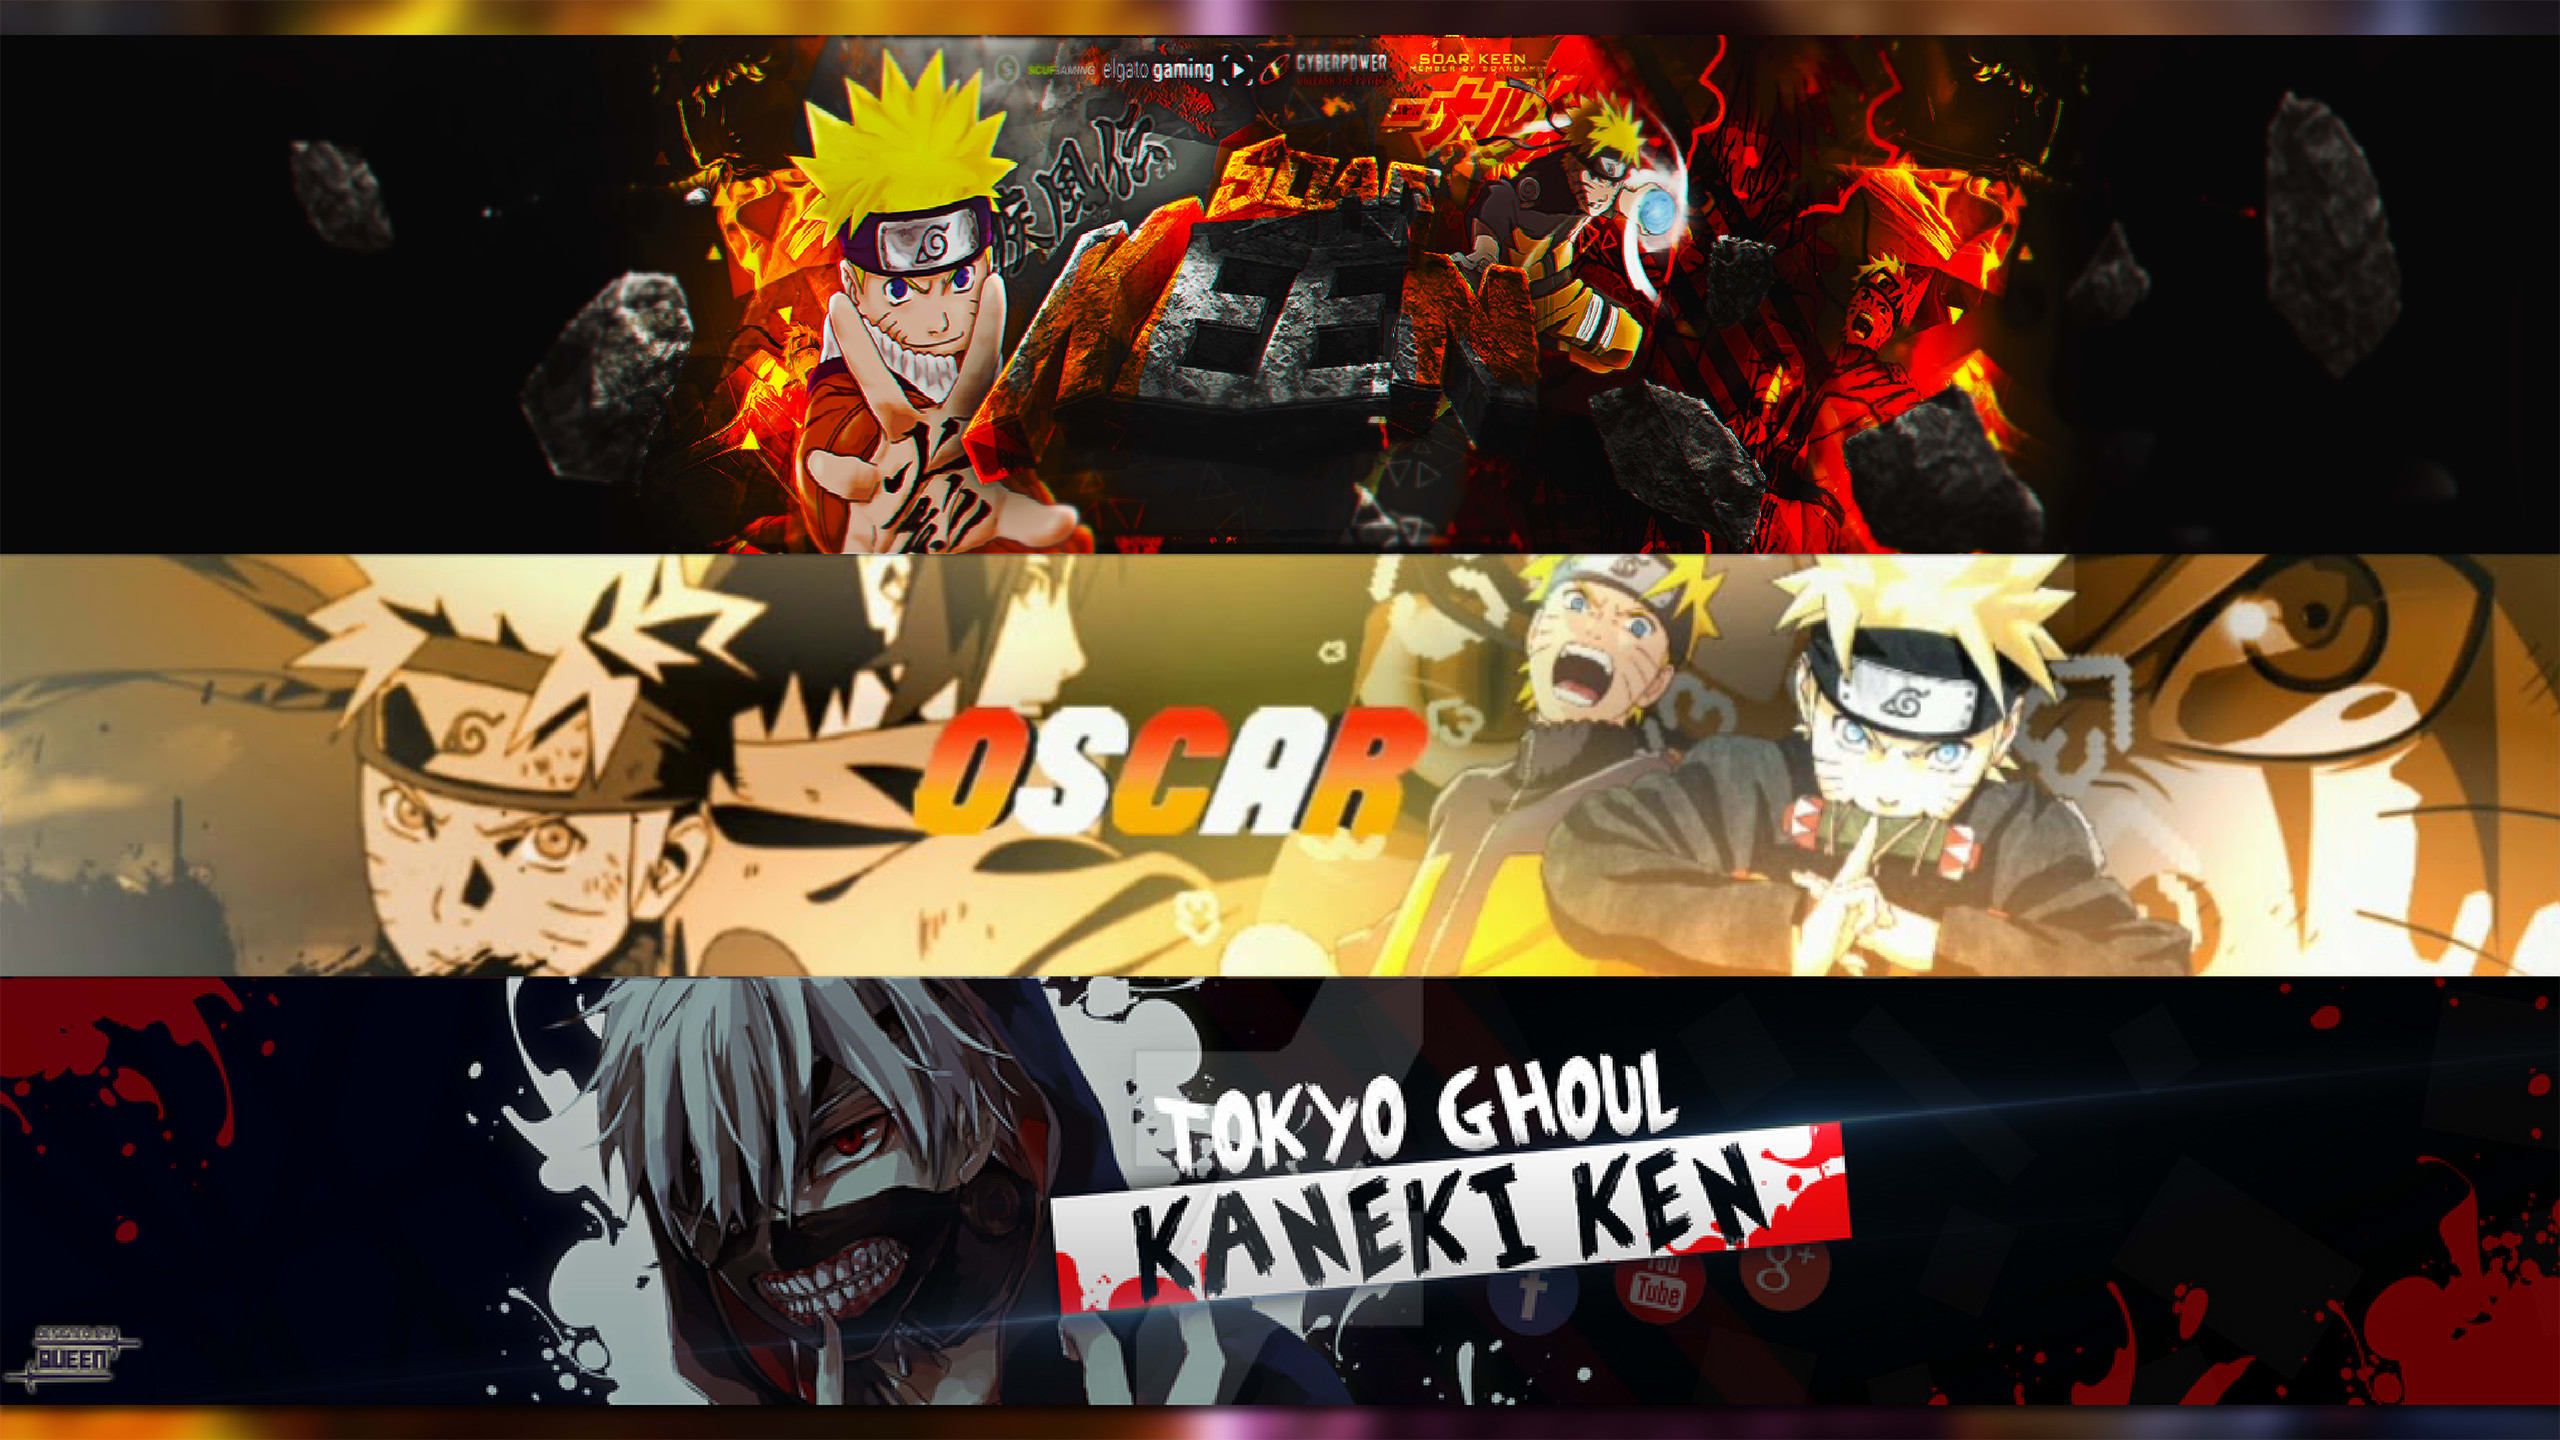 Naruto Youtube Banner Wallpapers - Wallpaper Cave